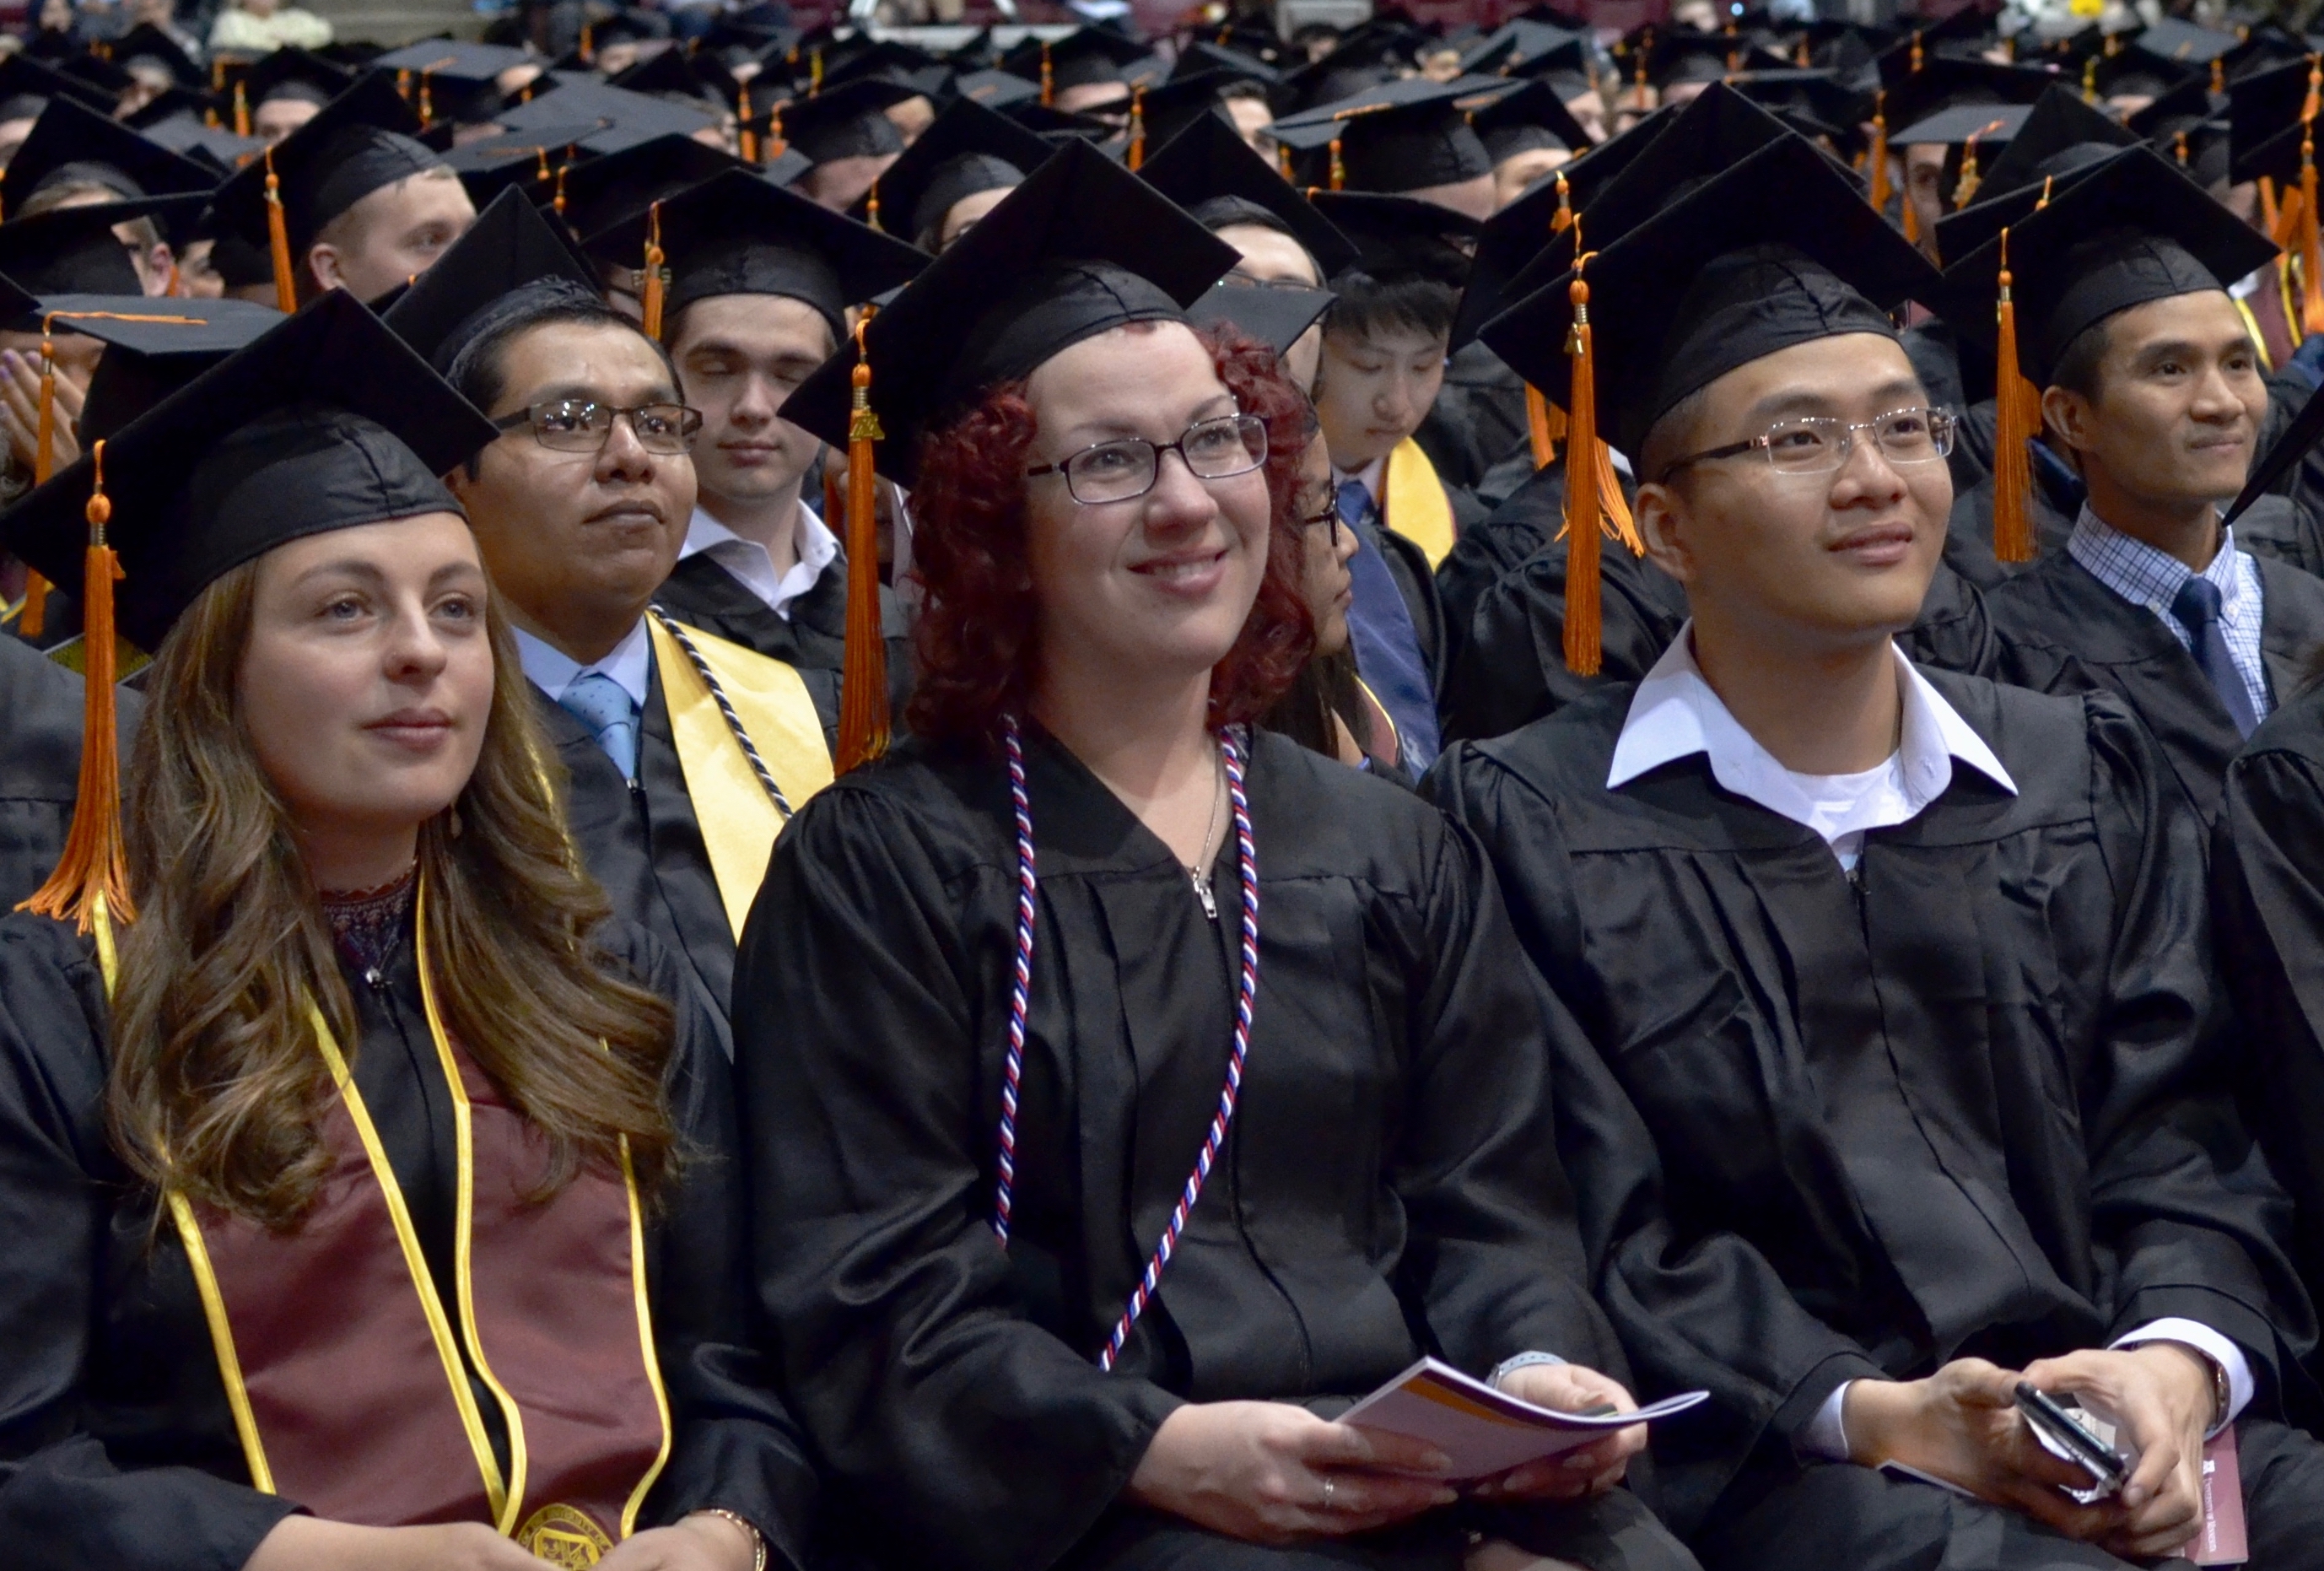 Undergradaute students in cap and gown sitting at commencement